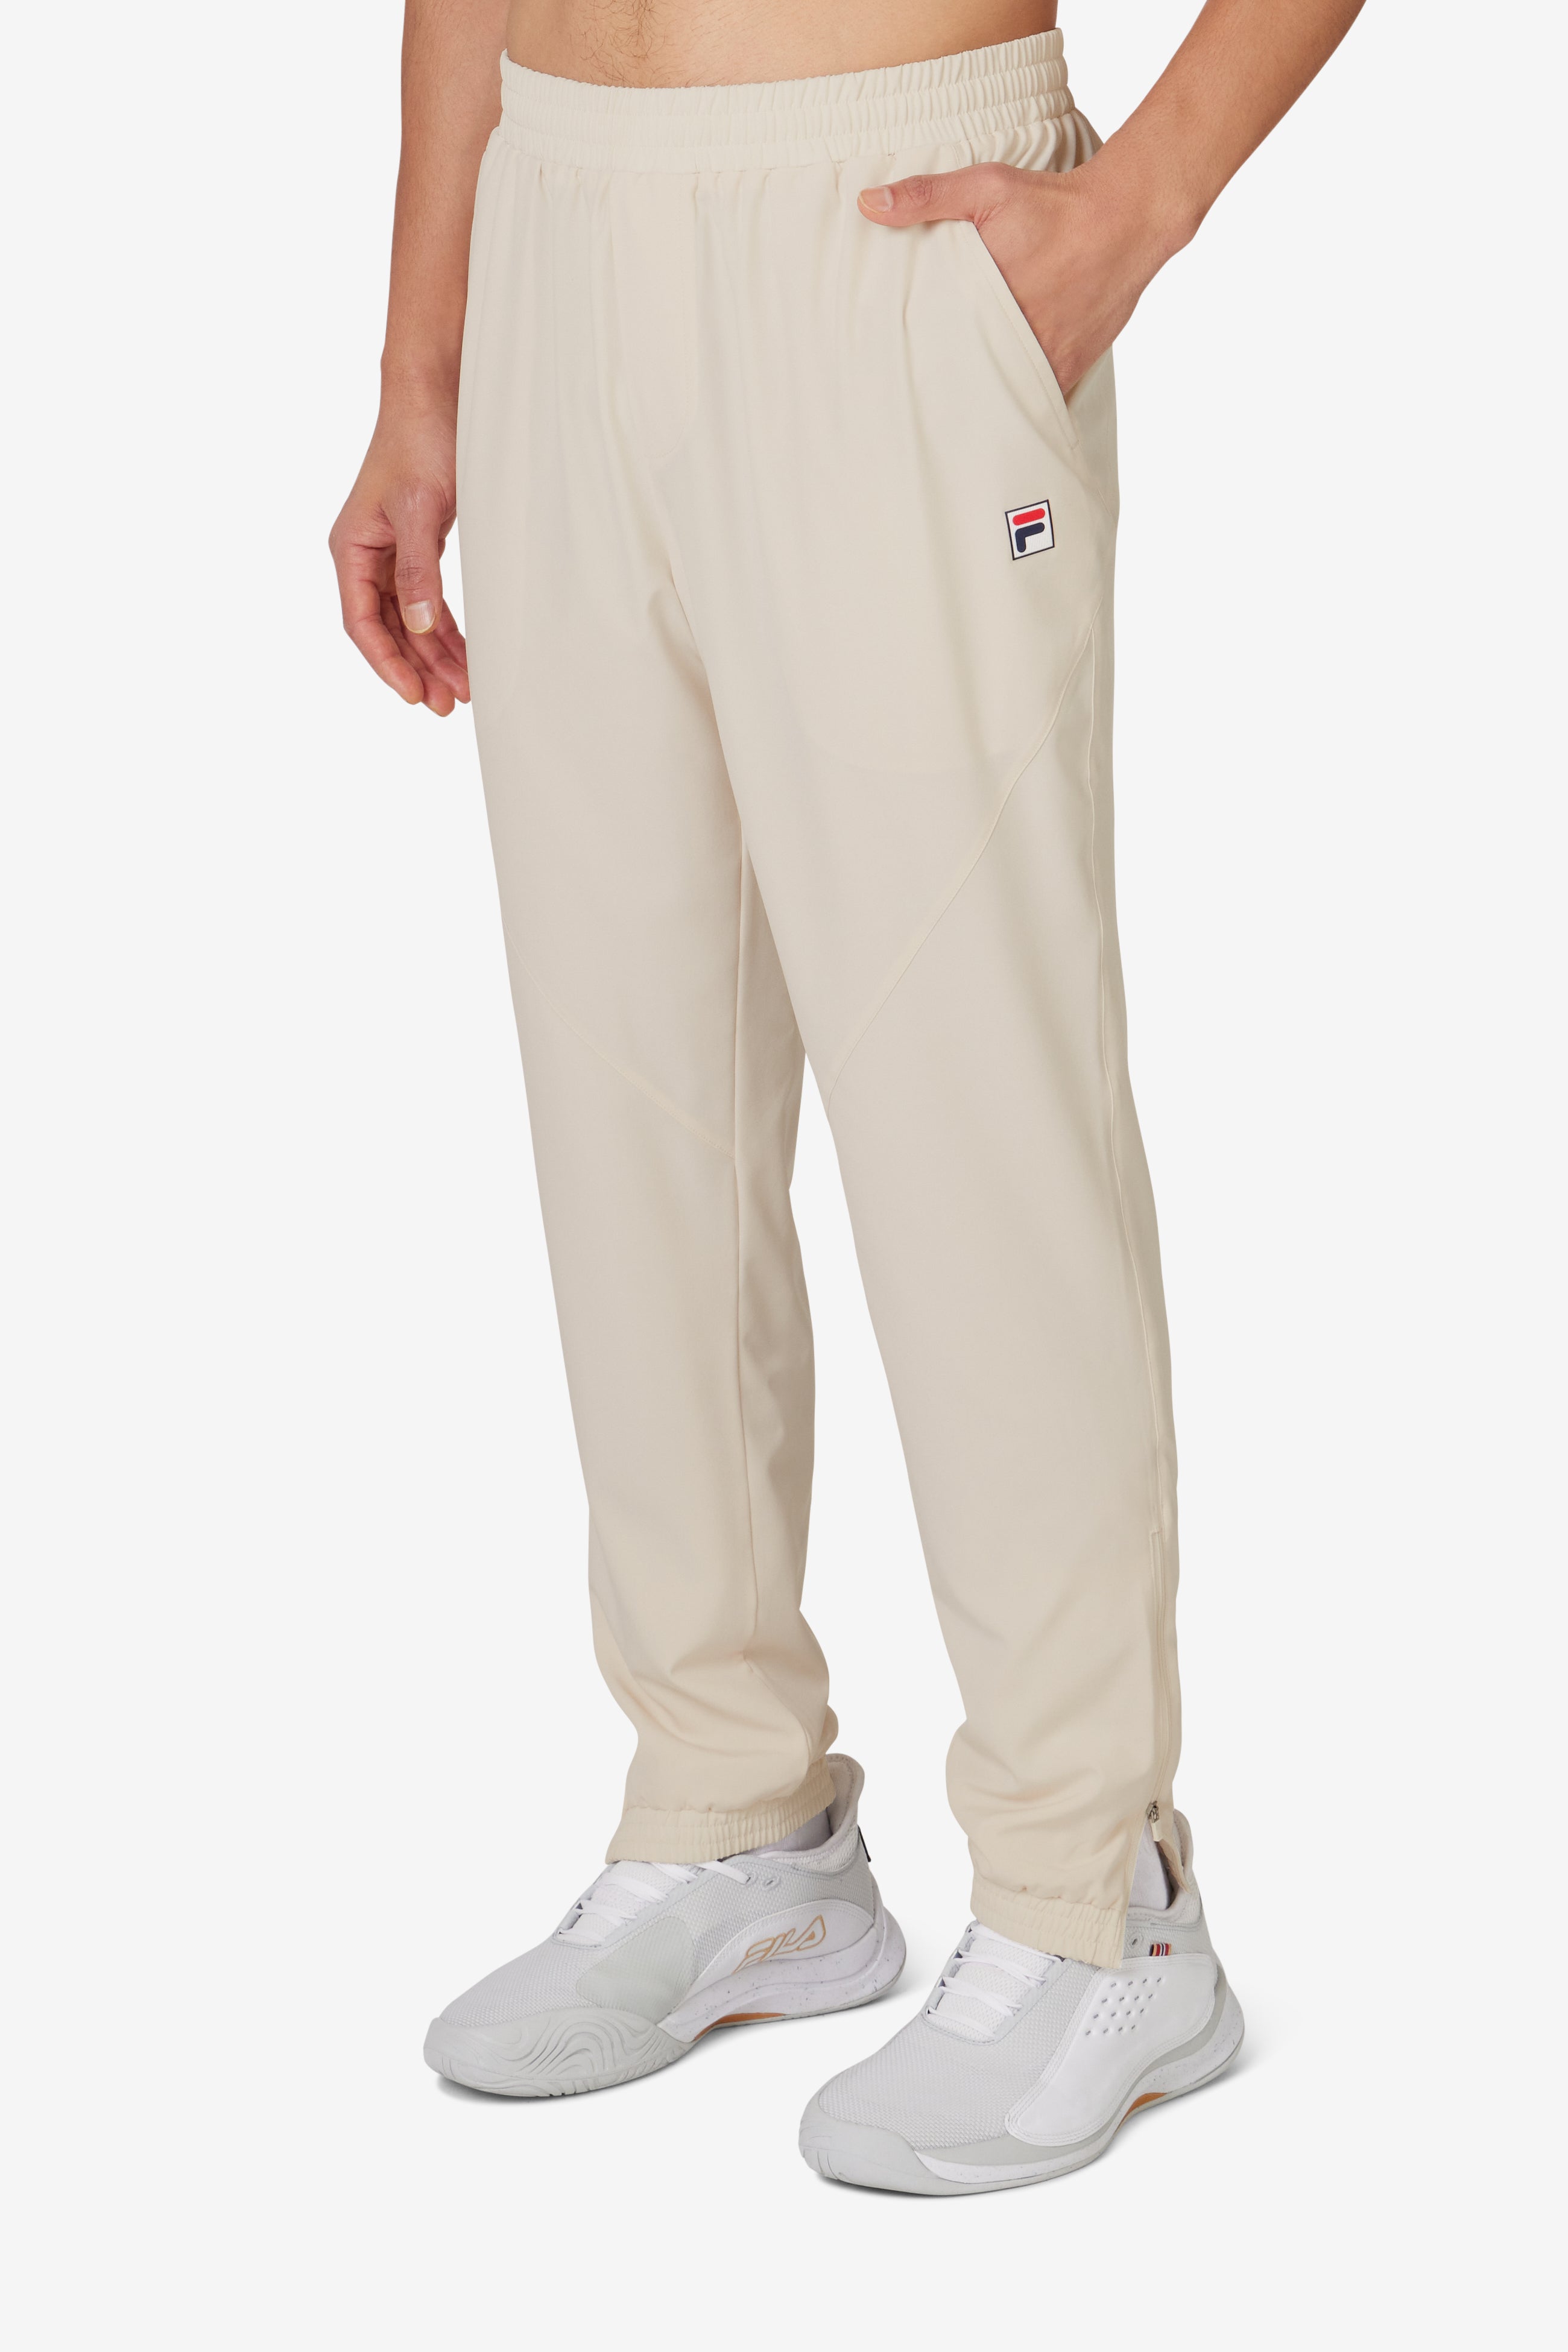 Tennis Woven Court Track Pant